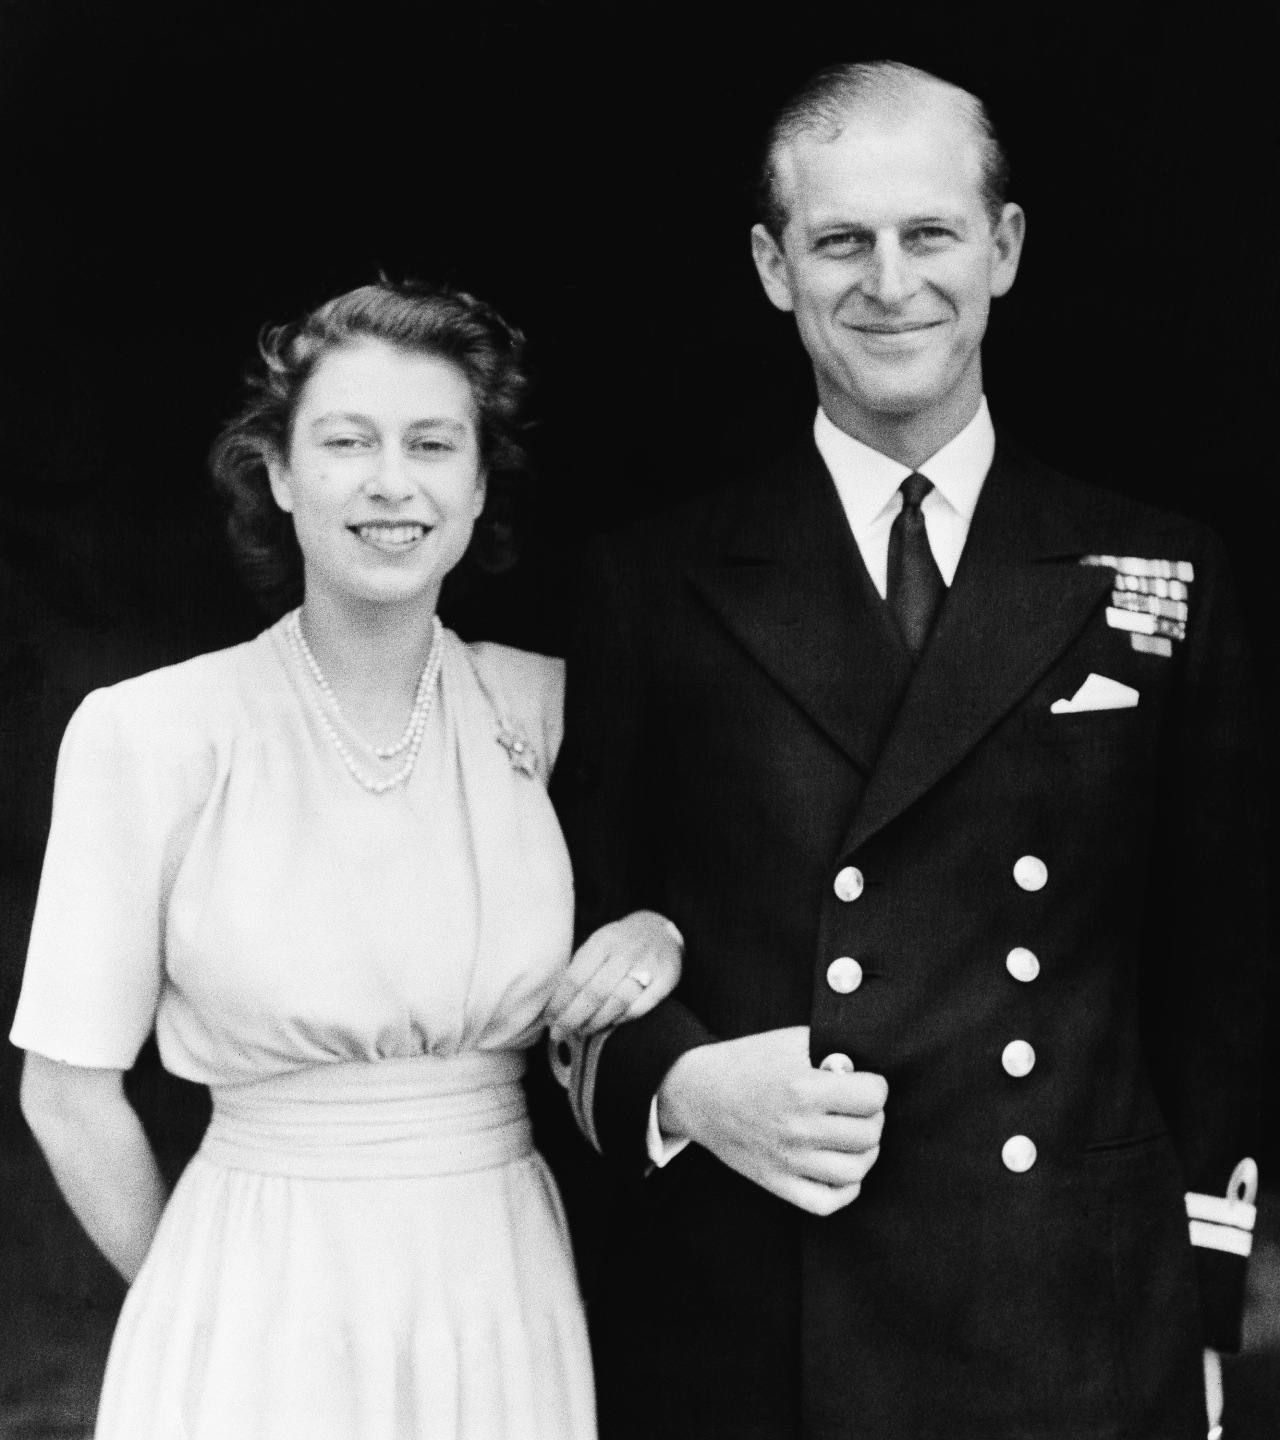 This July 10, 1947 official photo shows Britain's Princess Elizabeth, heir presumptive to the British throne and her fiance, Lieut. Philip Mountbatten, in London. (AP-Yonhap)